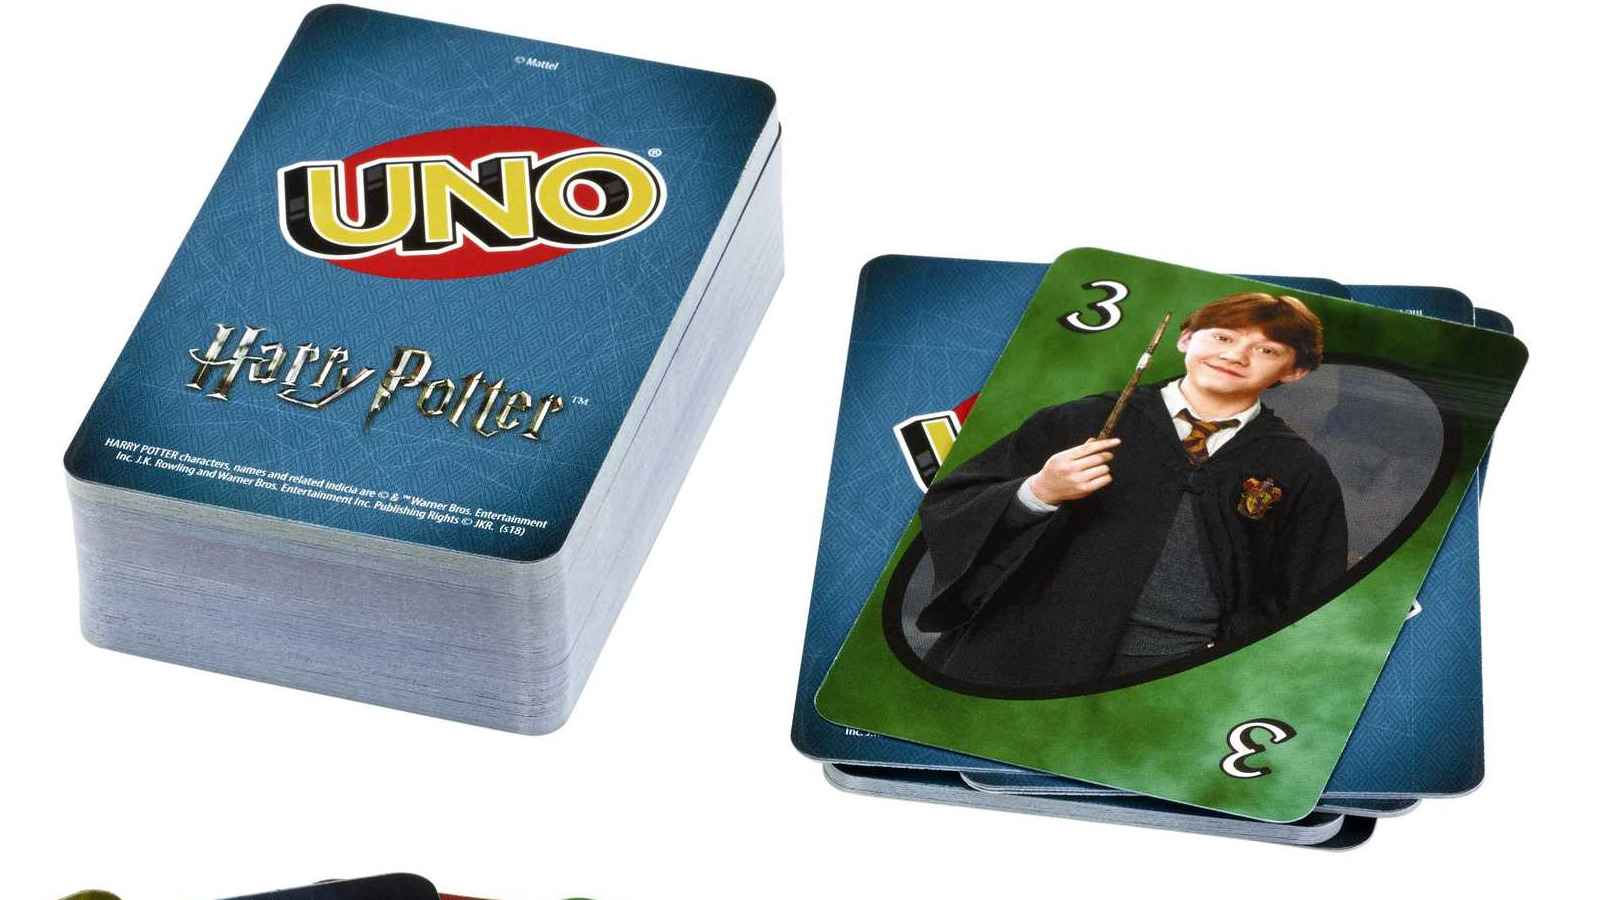 Harry Potter: UNO cards inspired by the world of the bespectacled wizard are super discounted on Amazon